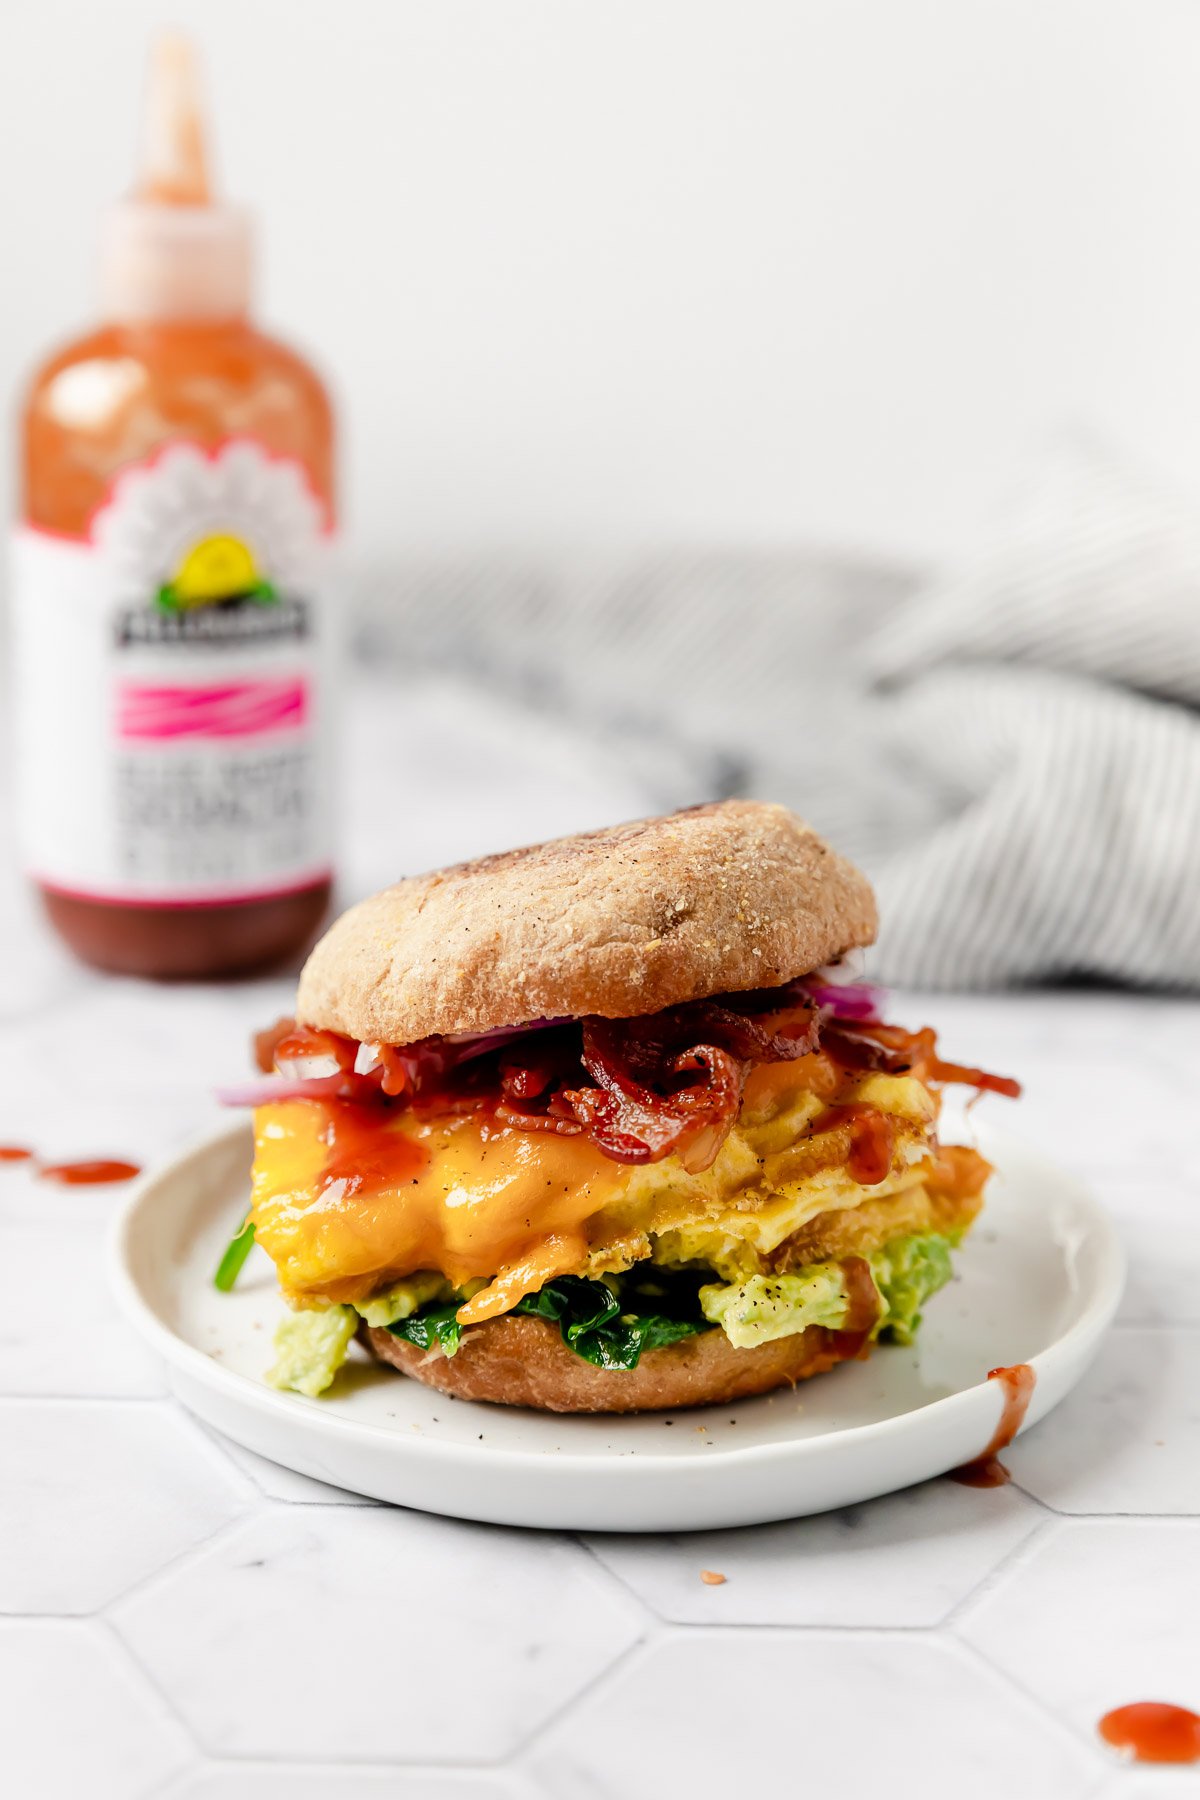 Make-Ahead Freezer Breakfast Sandwiches - The Real Food Dietitians